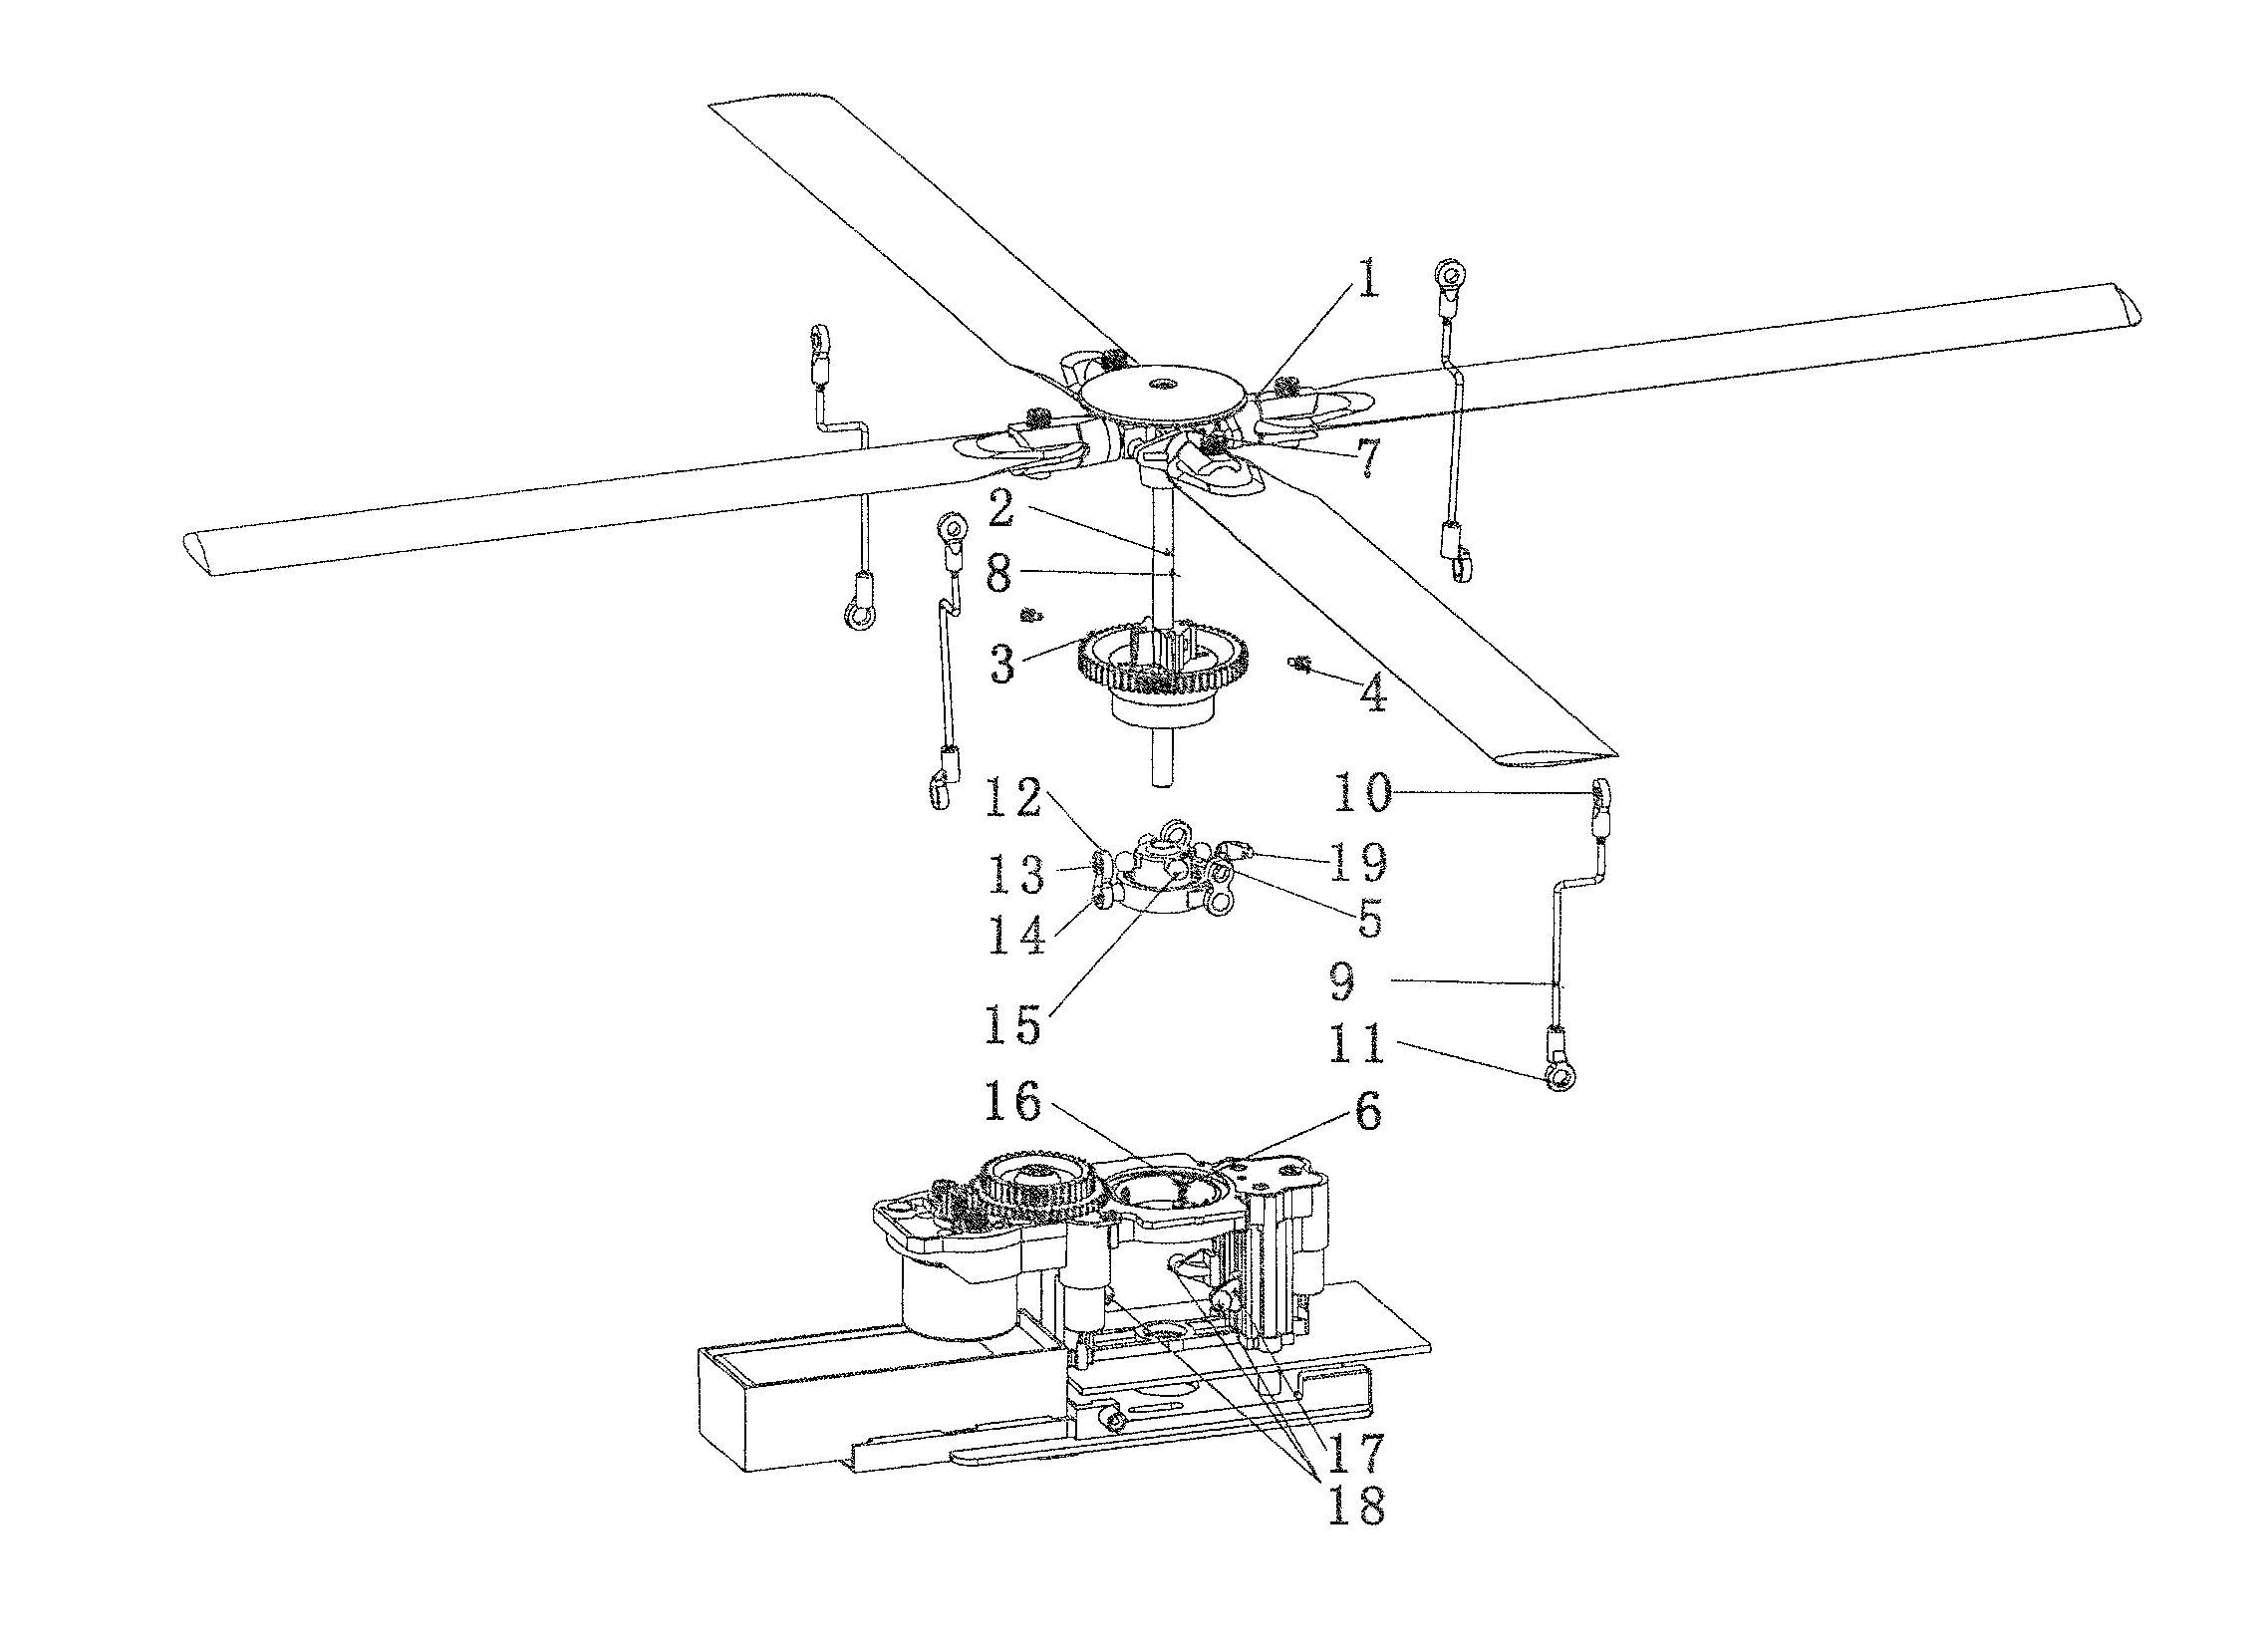 Transmission Mechanism for Remote-Controlled Model Stimulated Helicopter